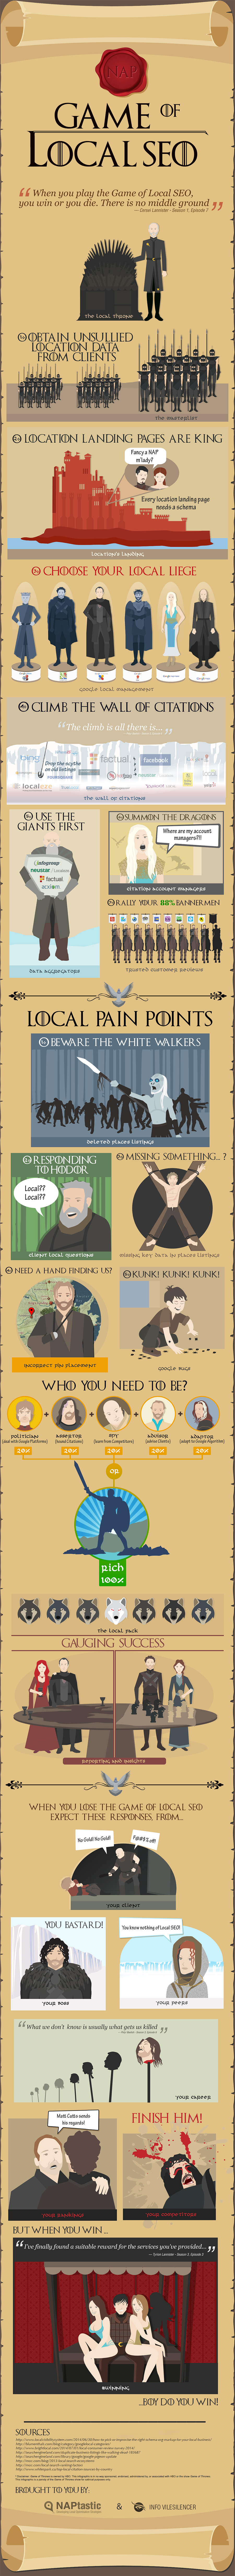 infographie-local-seo-game-of-thrones